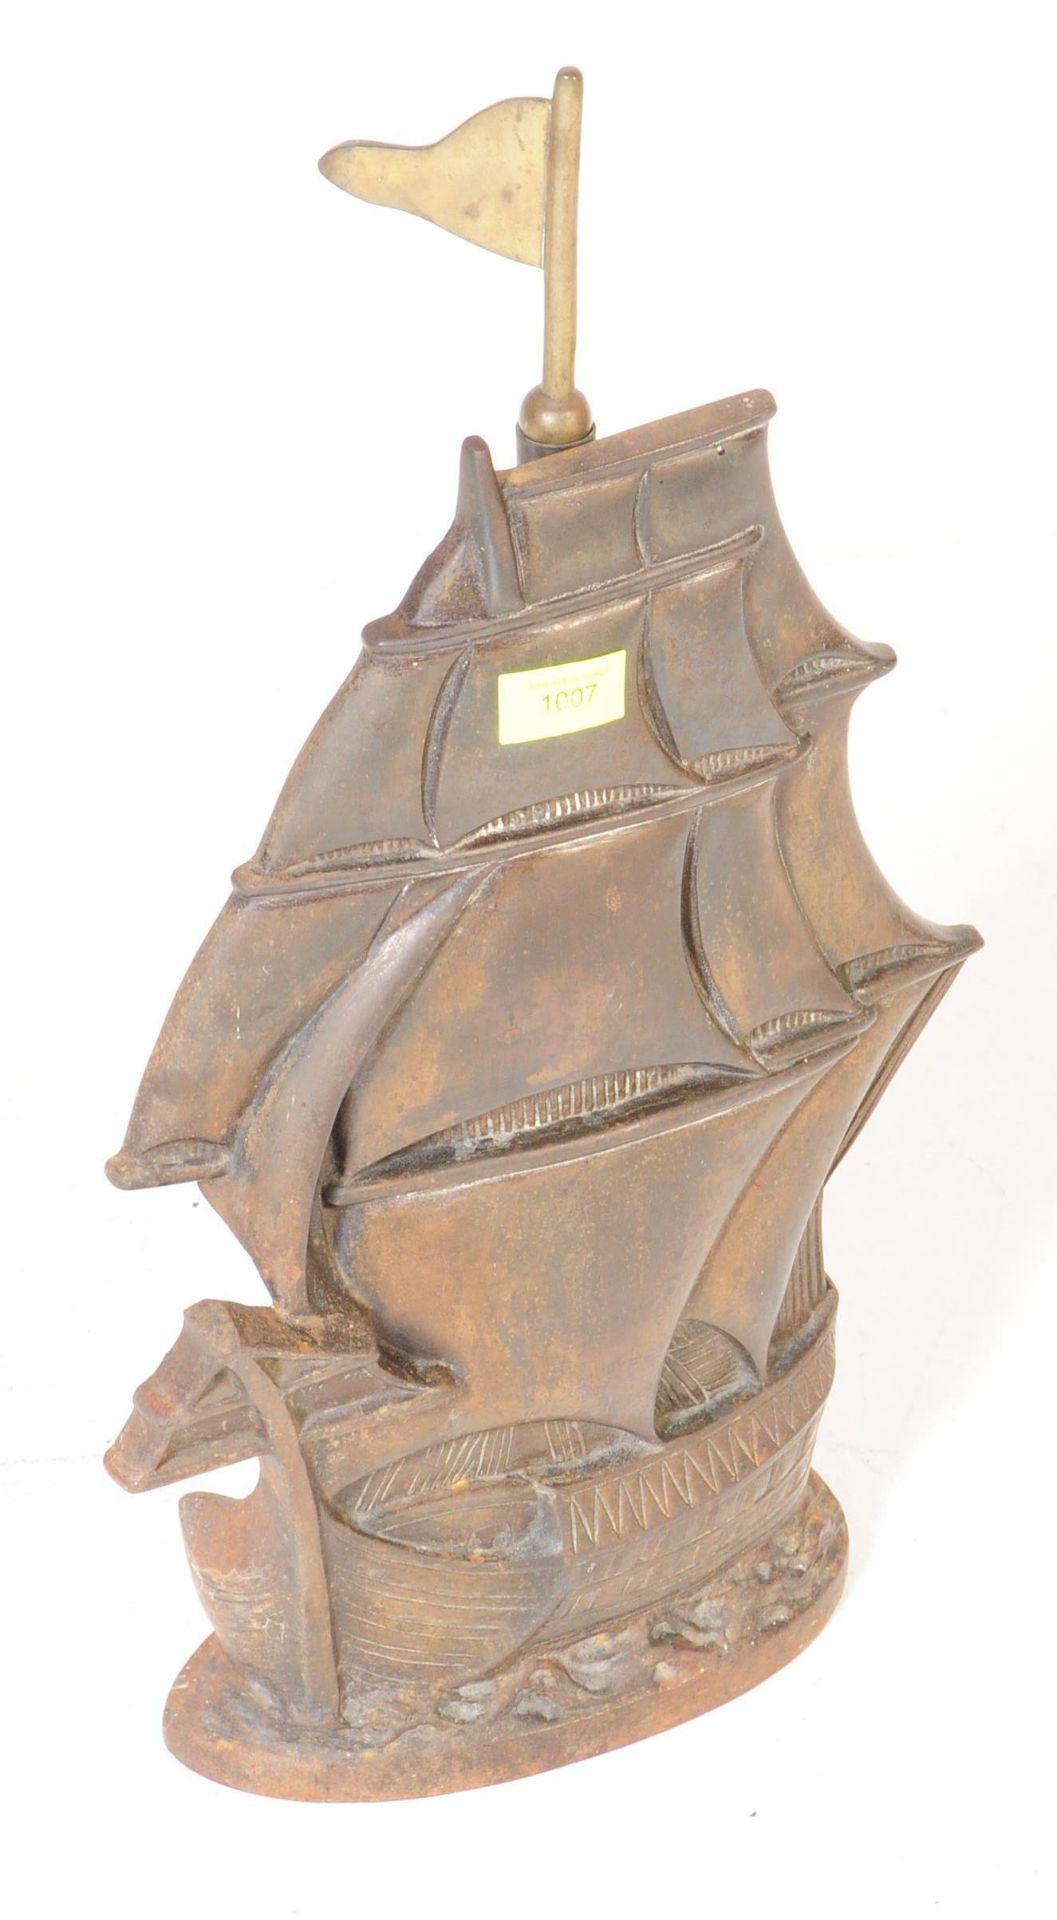 EARLY 20TH CENTURY BRASS FIRESIDE SET - GALLEON SHIP - Image 2 of 4